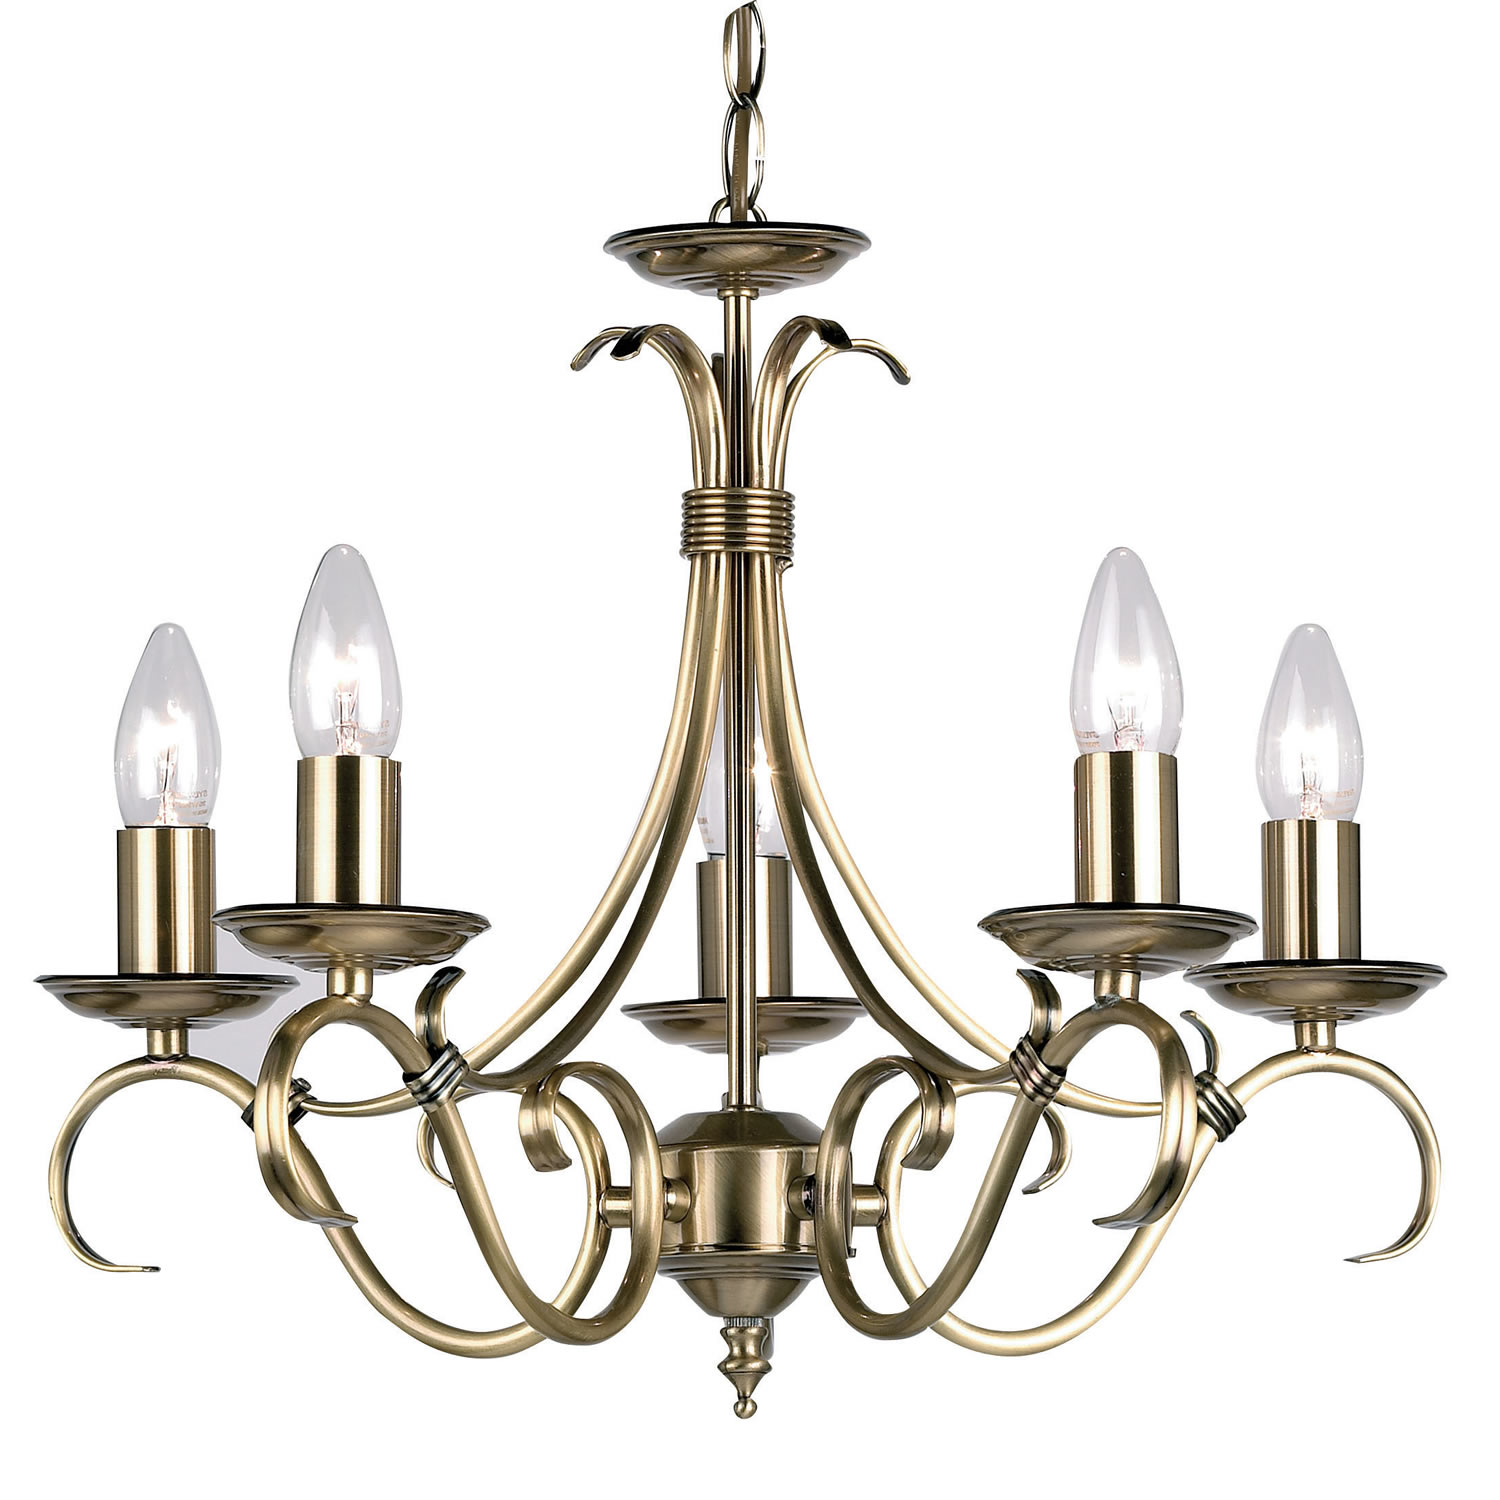 Awesome Great Ceiling Lights And Chandeliers 5 Ceiling Light Bee.